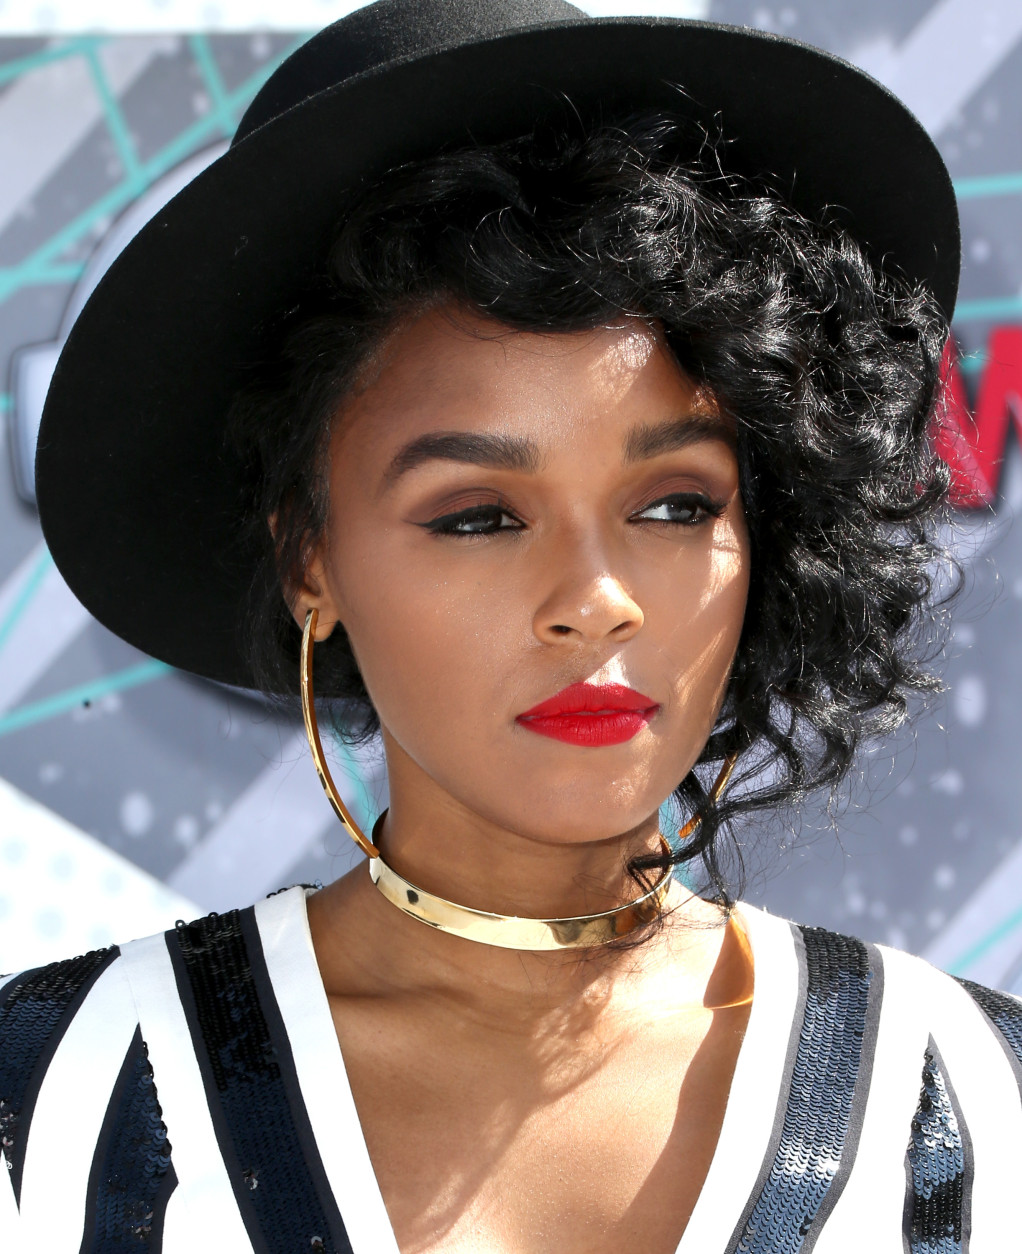 LOS ANGELES, CA - JUNE 26:  Singer Janelle Monae attends the 2016 BET Awards at the Microsoft Theater on June 26, 2016 in Los Angeles, California.  (Photo by Frederick M. Brown/Getty Images)